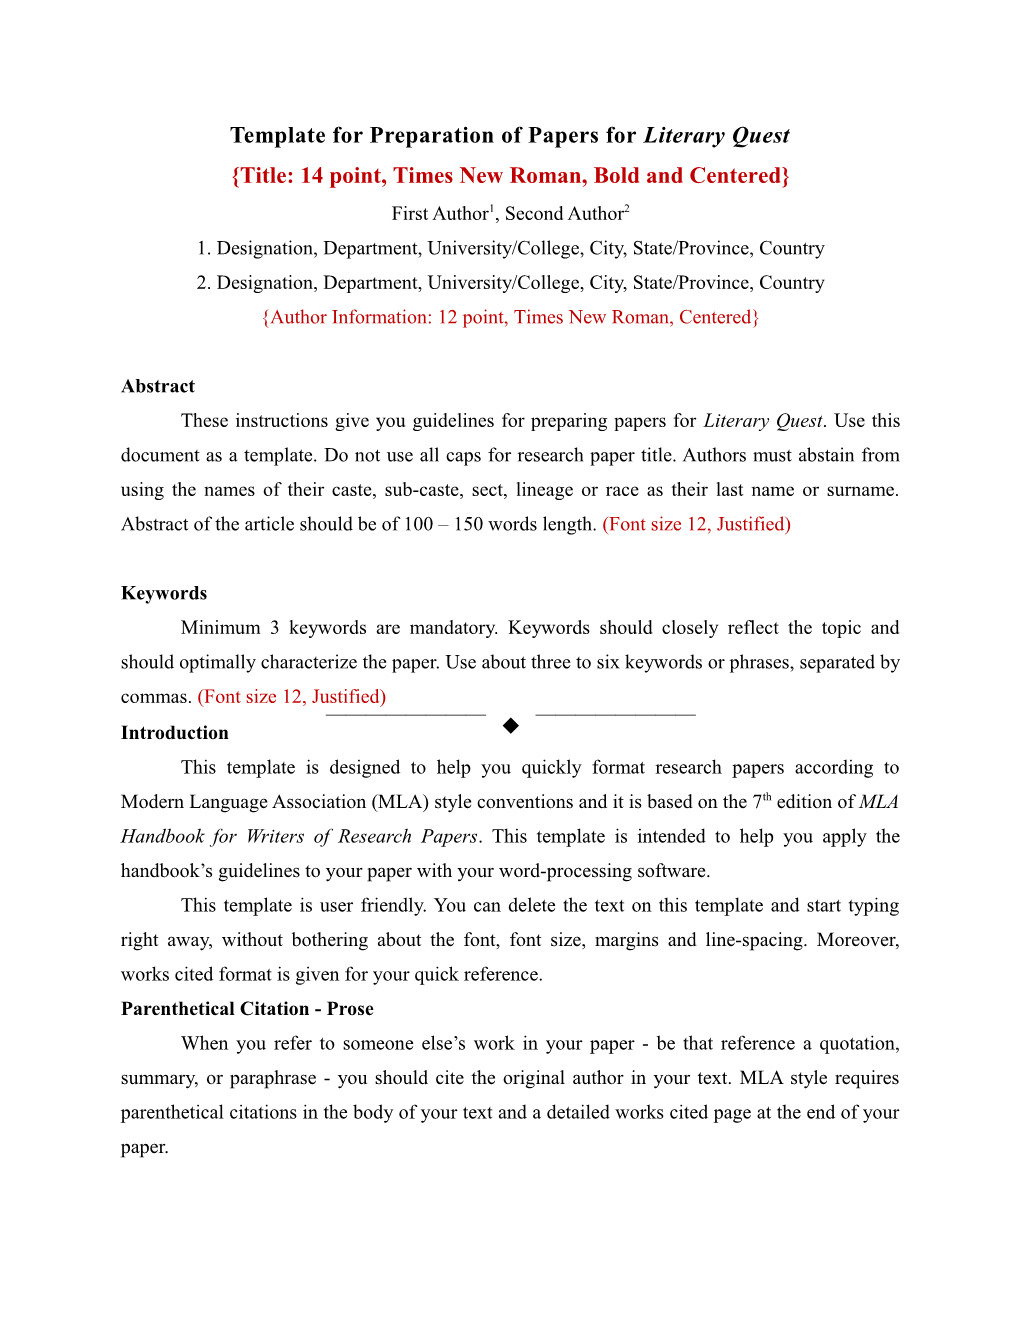 Template for Preparation of Papers for Literary Quest